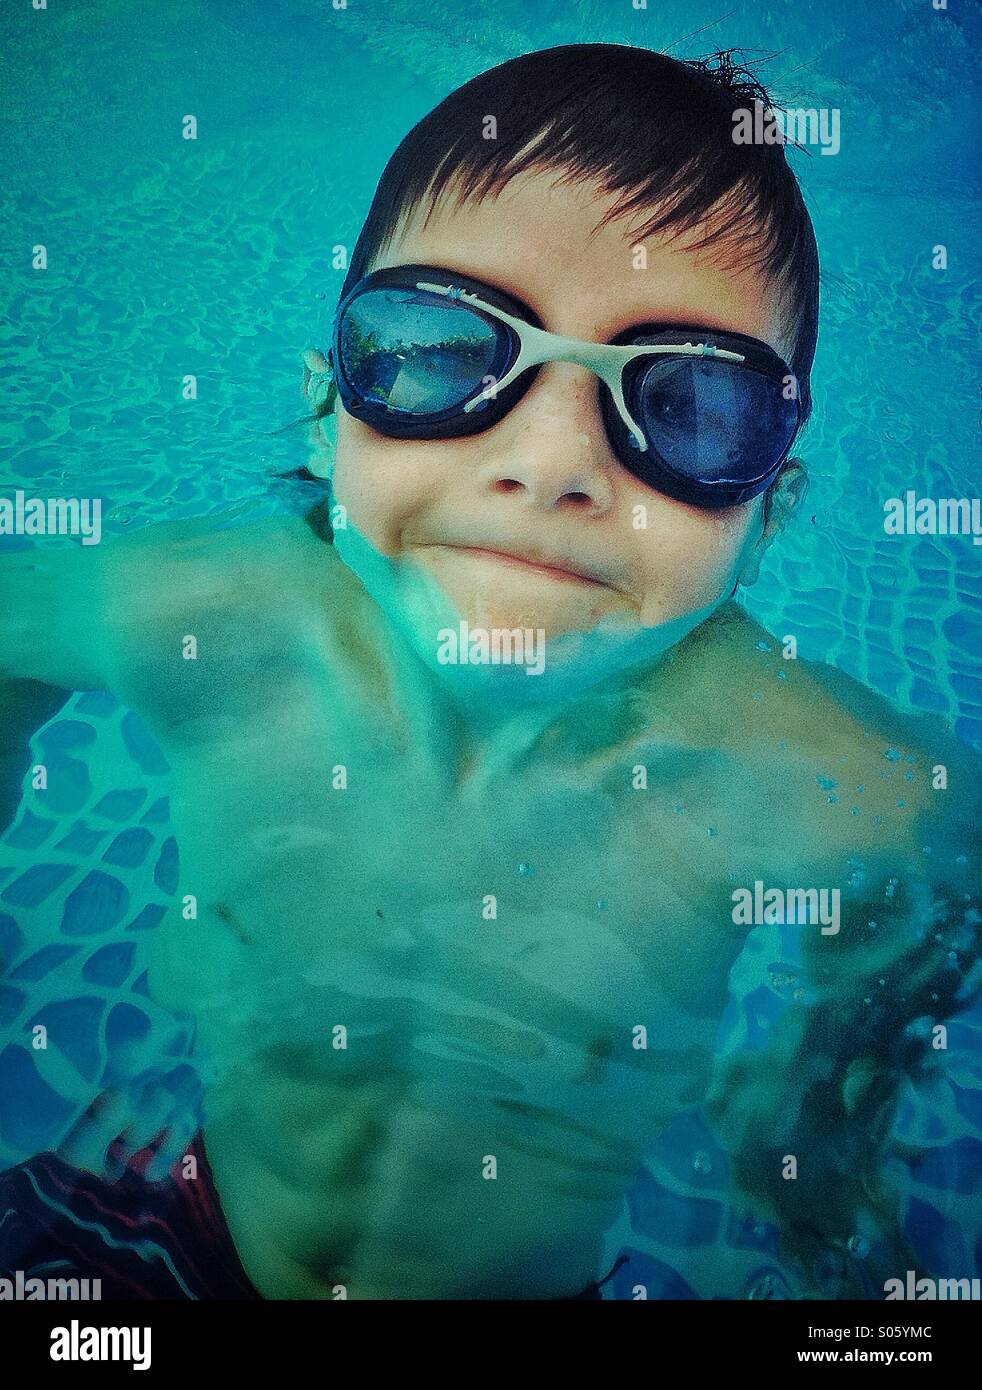 Smiling boy playing and swimming on a pool Stock Photo